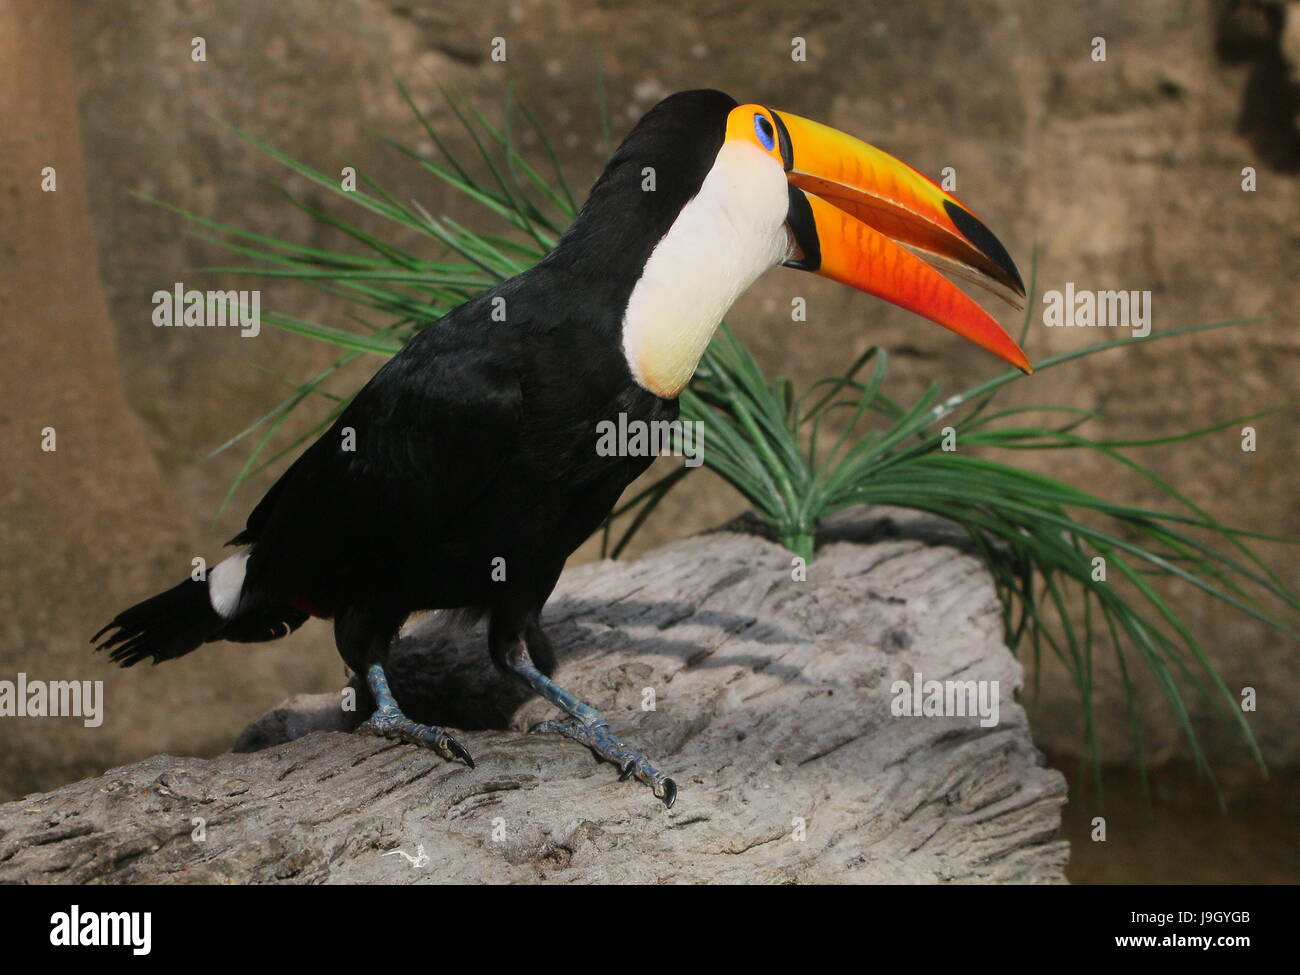 Close-up of the head of a Common or Toco Toucan (Ramphastos toco), native to South America. Stock Photo